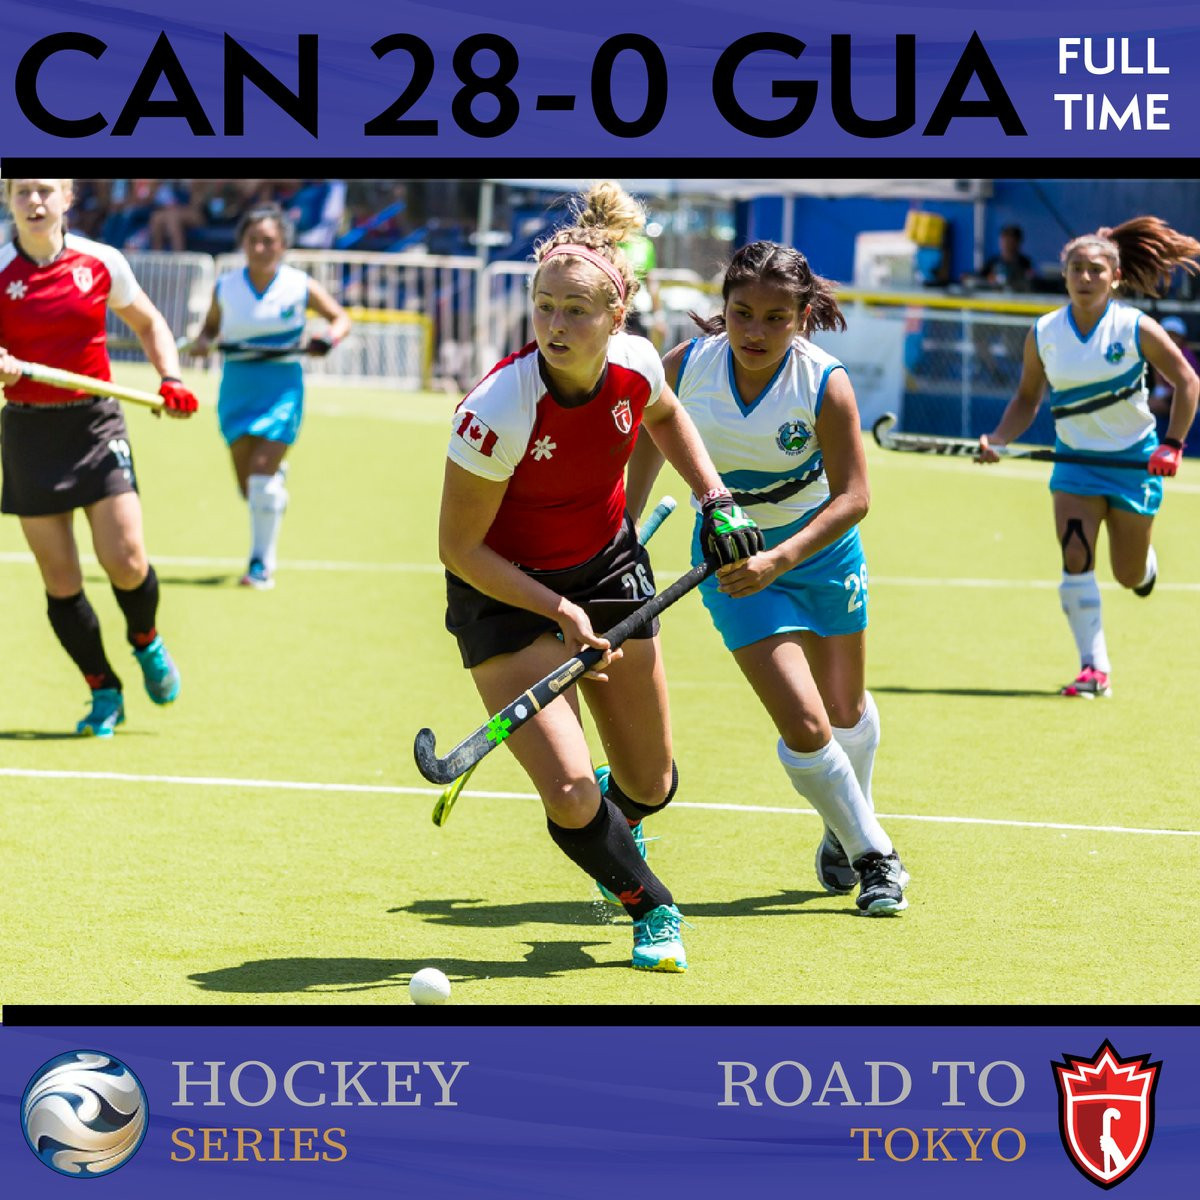 Canadian women begin Hockey Series with massive victory over Guatemala